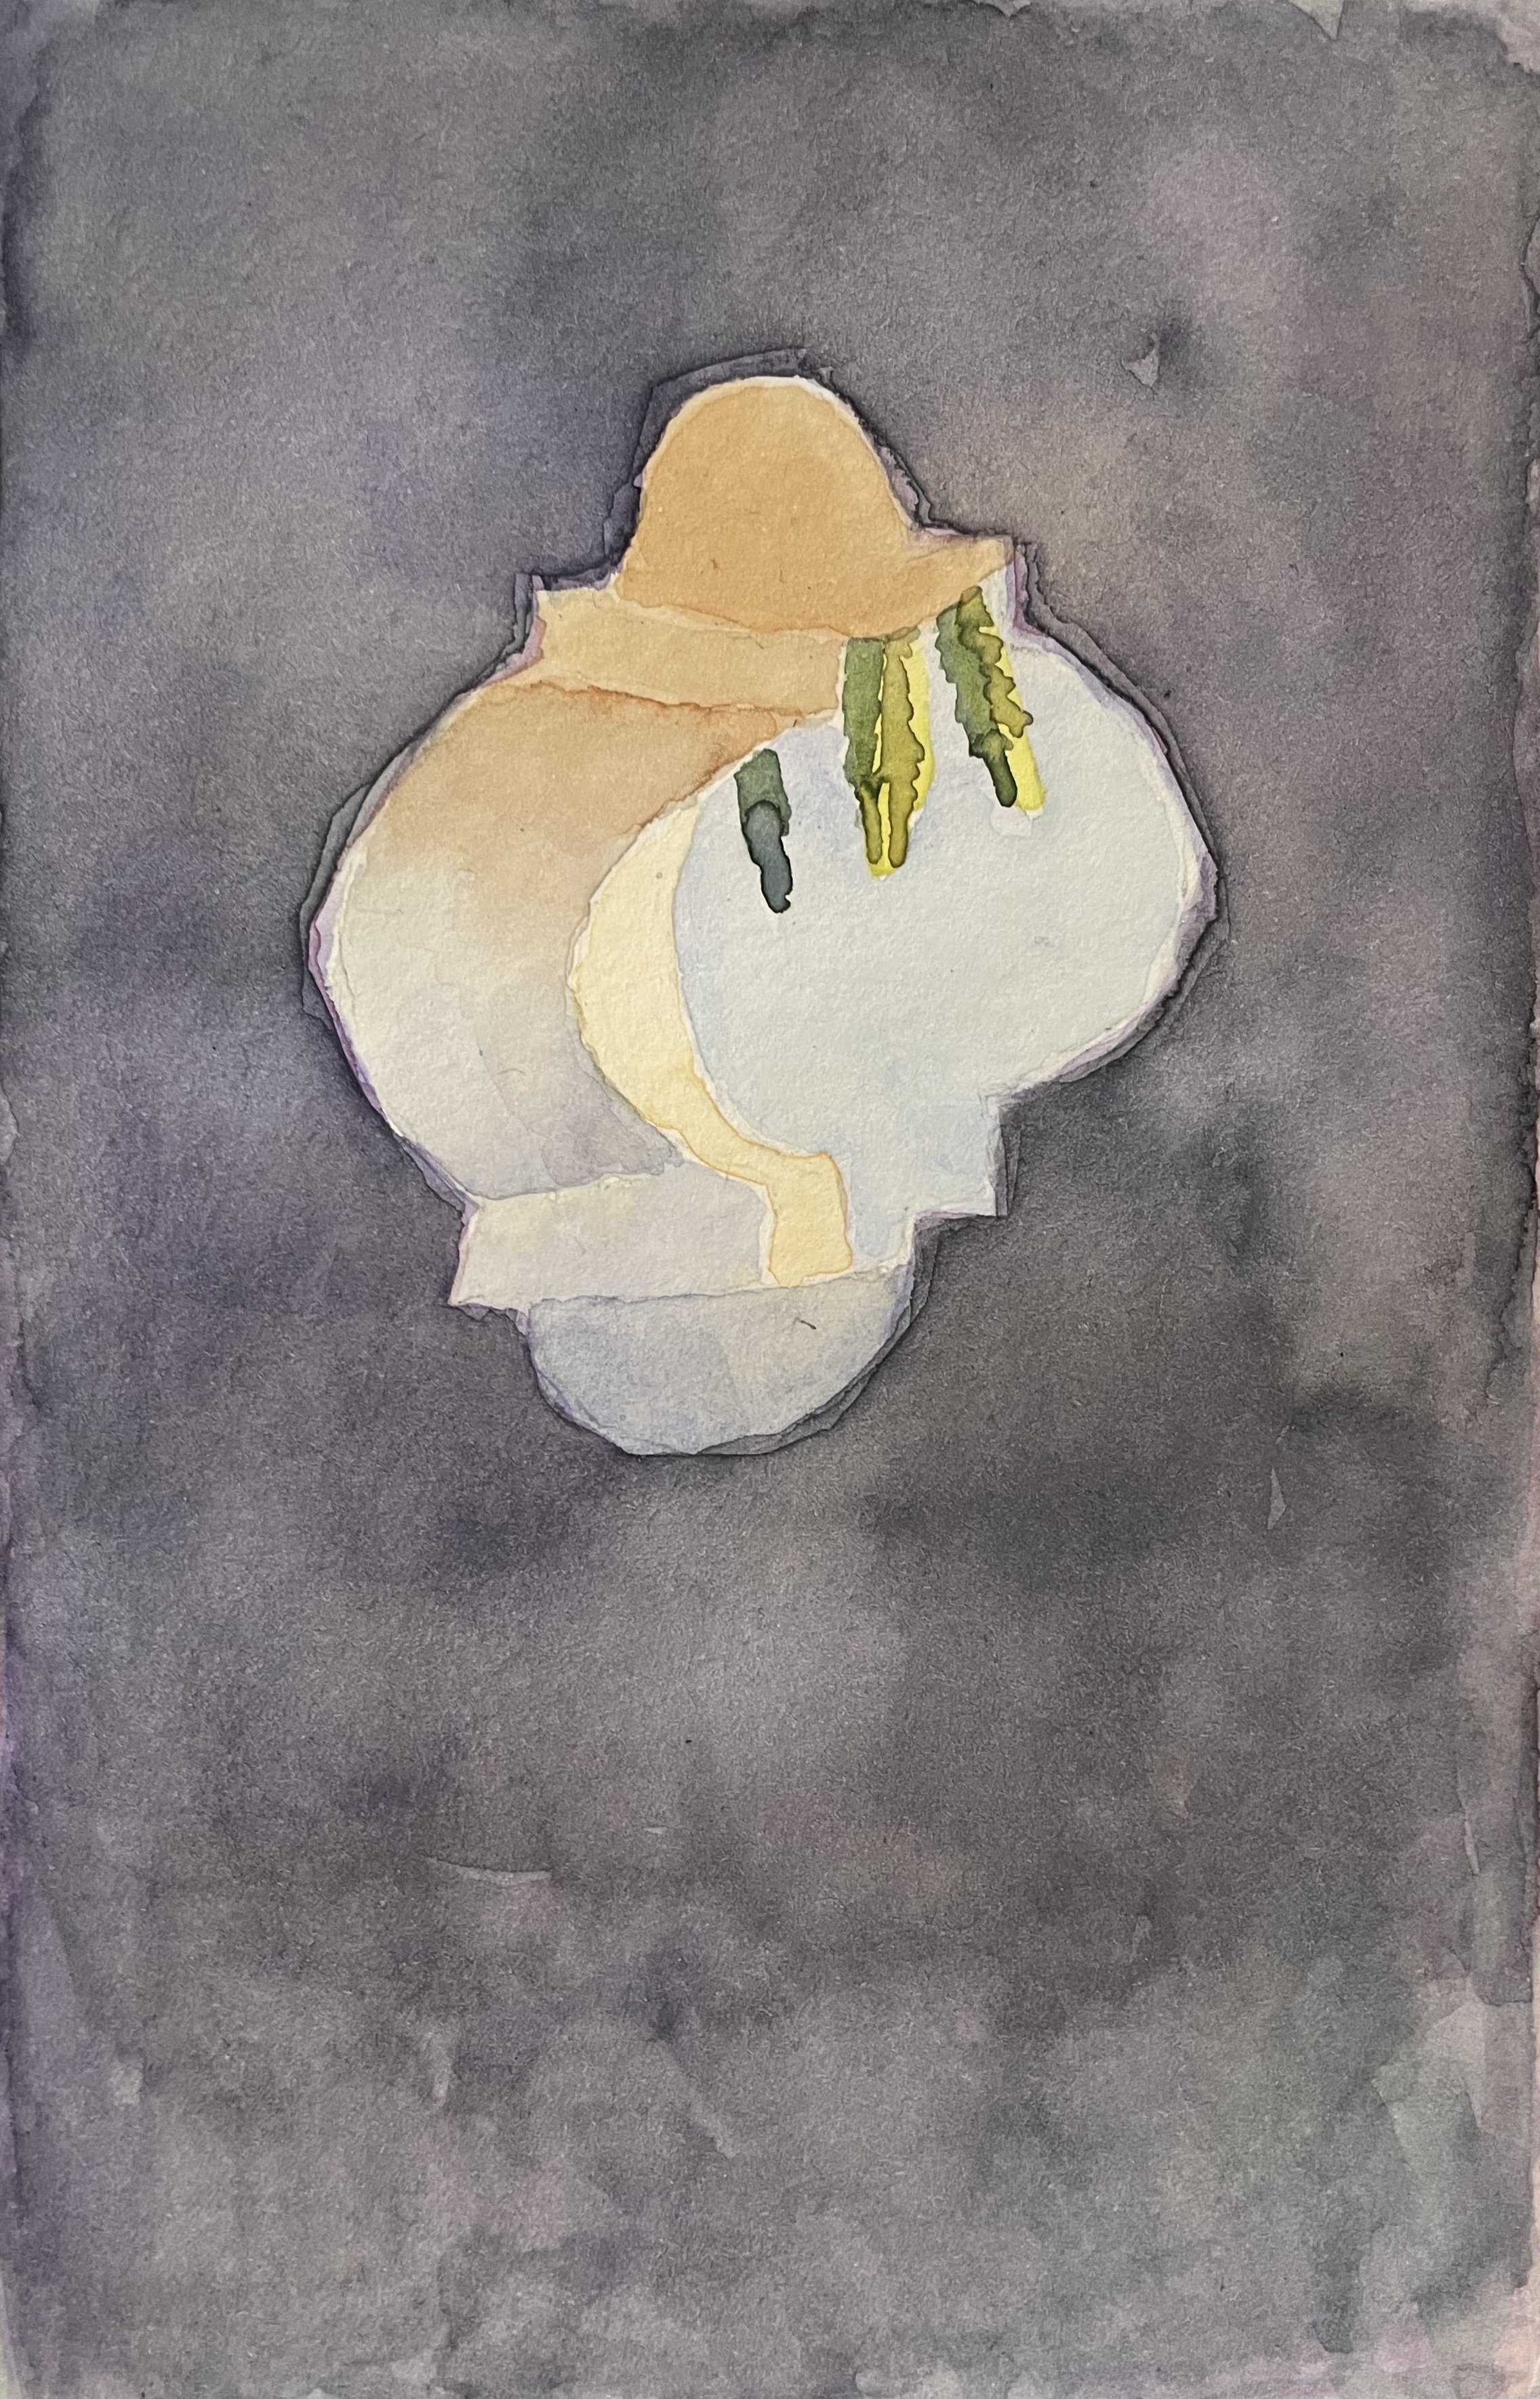 6 x 4 inches, watercolor, 2022